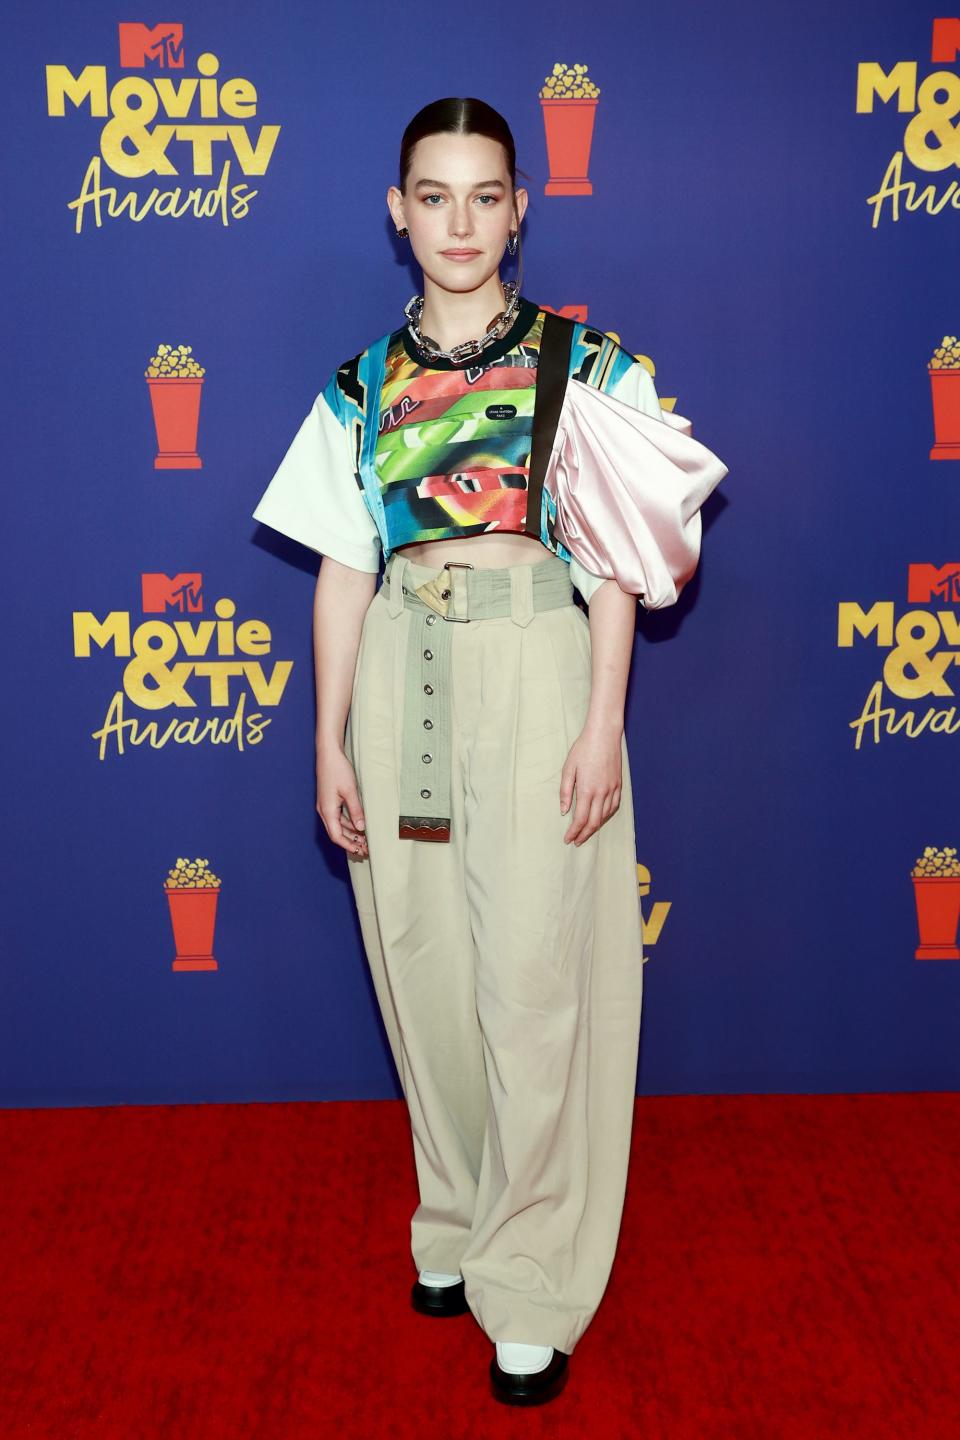 Victoria Pedretti at the 2021 MTV Movie Awards on May 16